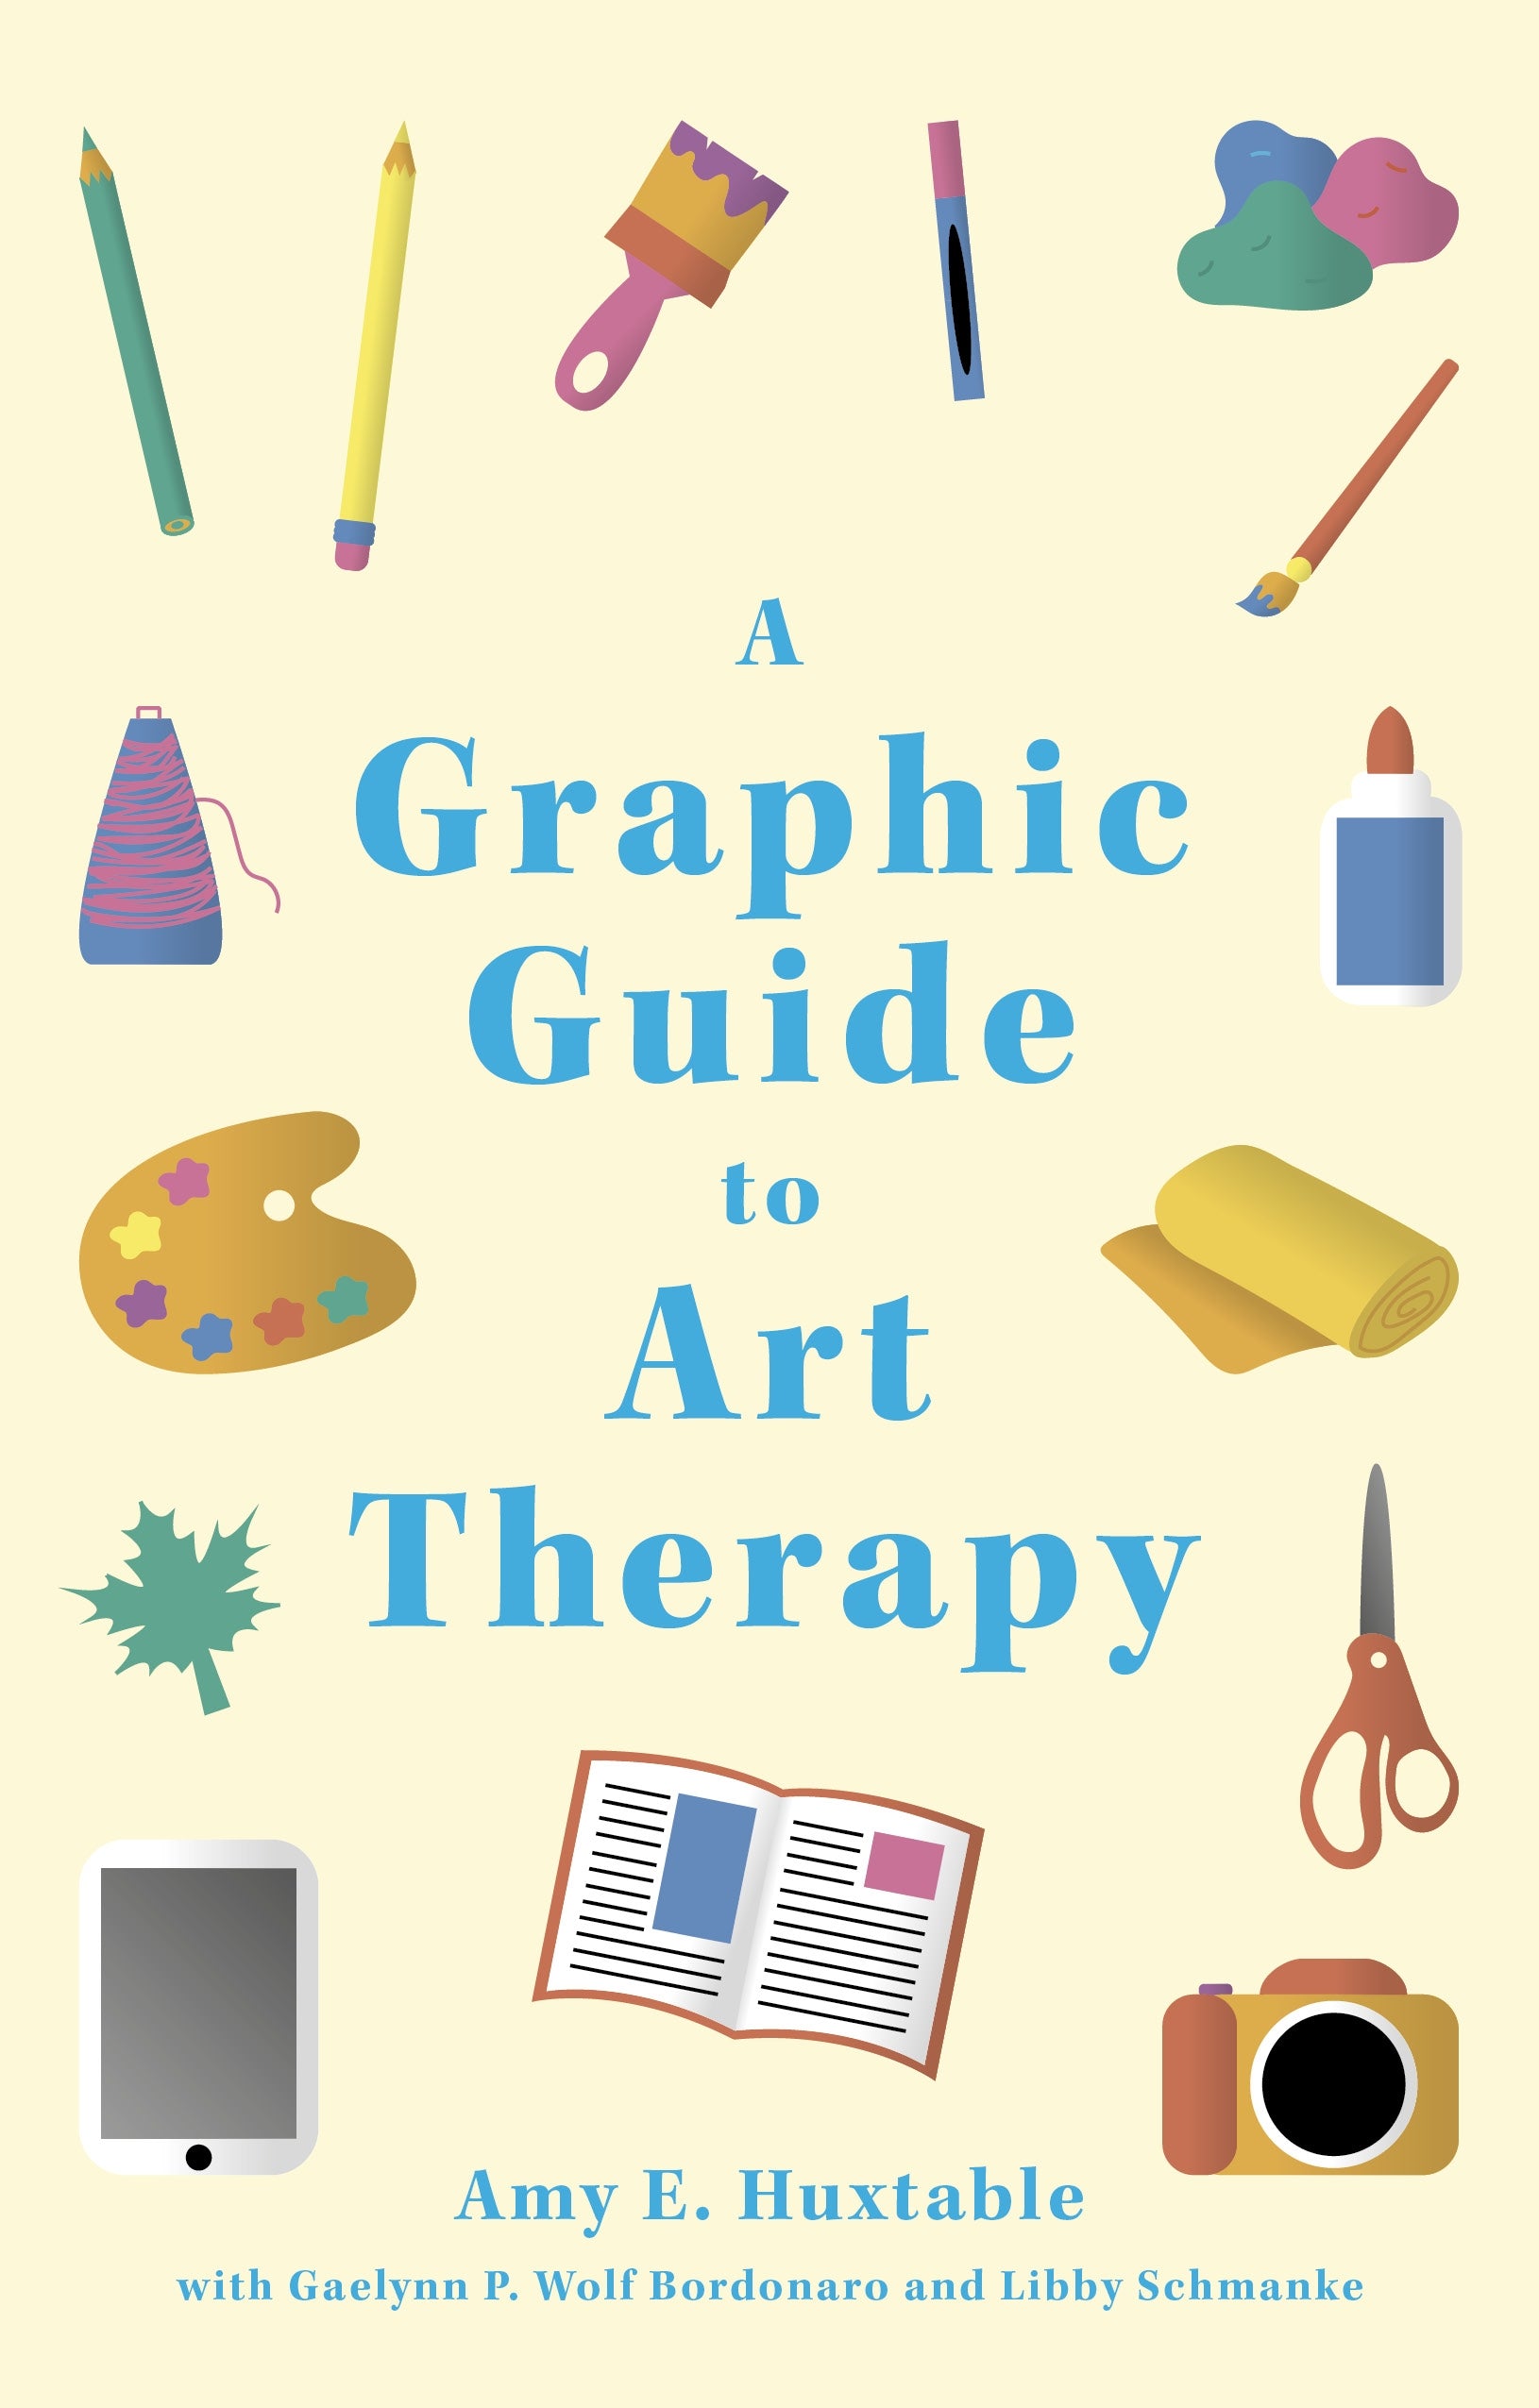 A Graphic Guide to Art Therapy by Amy E. Huxtable, Libby Schmanke, Gaelynn P. Wolf Bordonaro